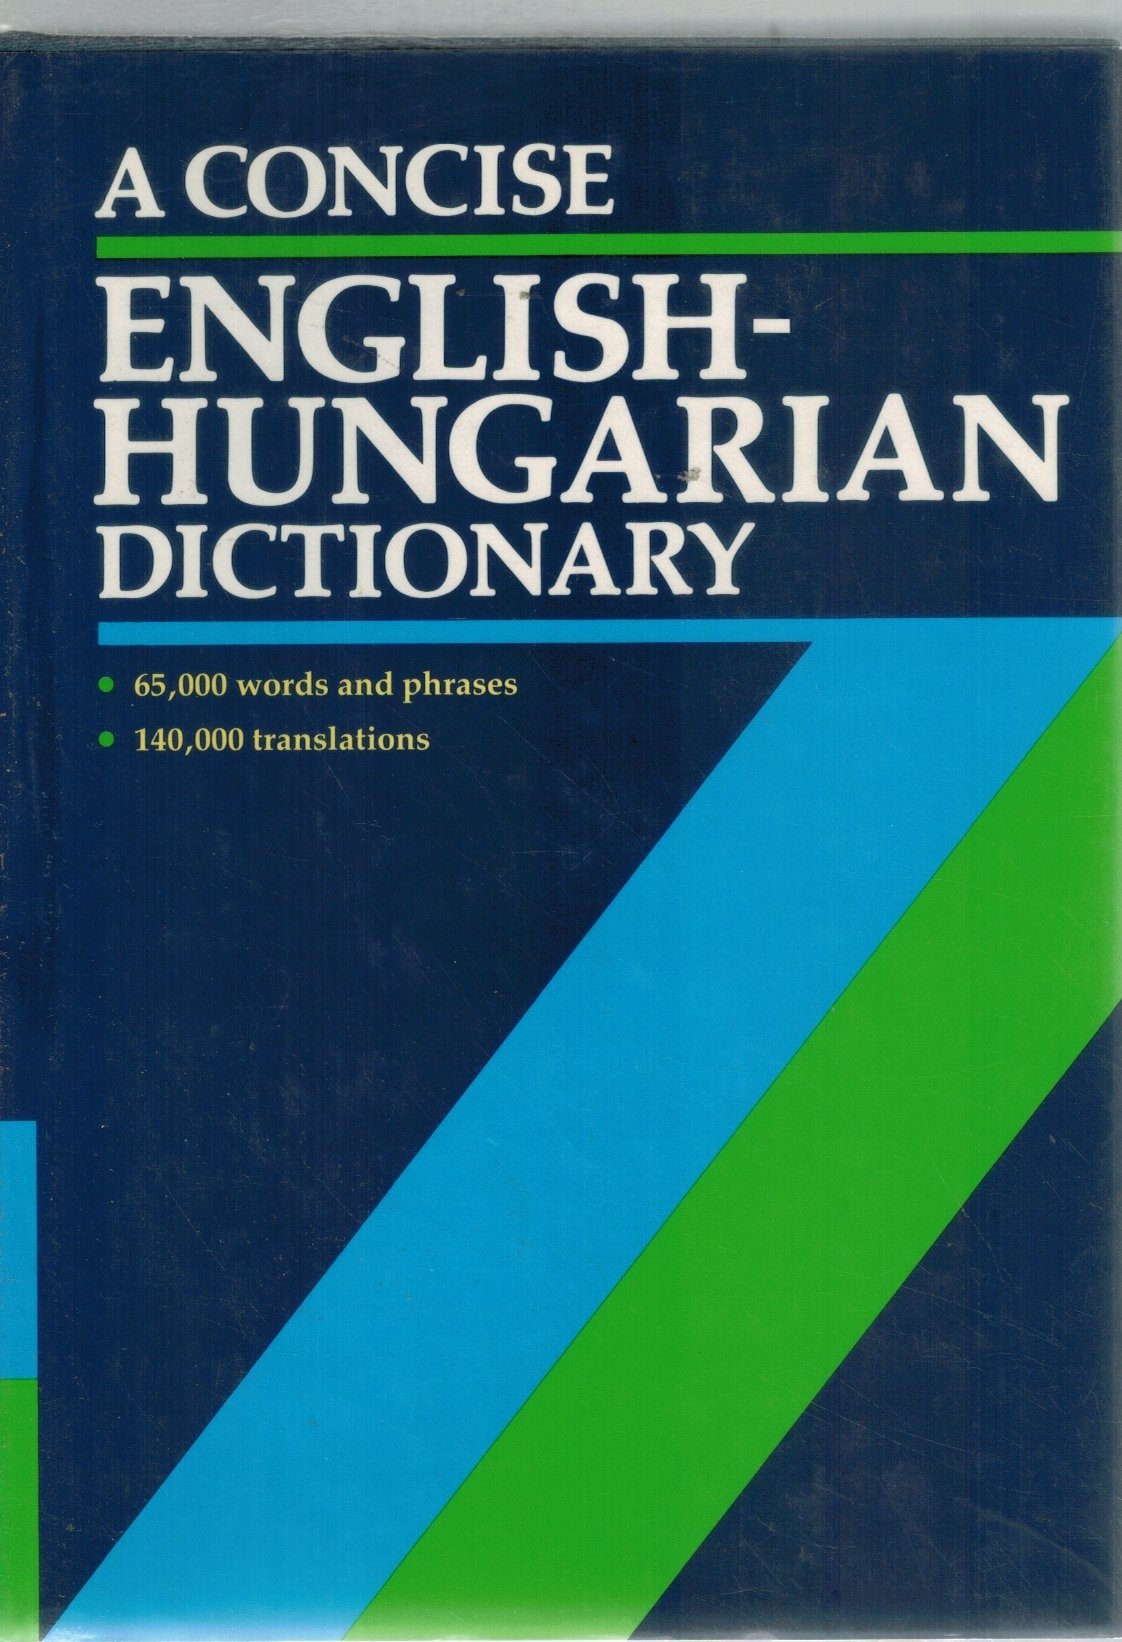 A CONCISE ENGLISH-HUNGARIAN DICTIONARY  by Országh, L.